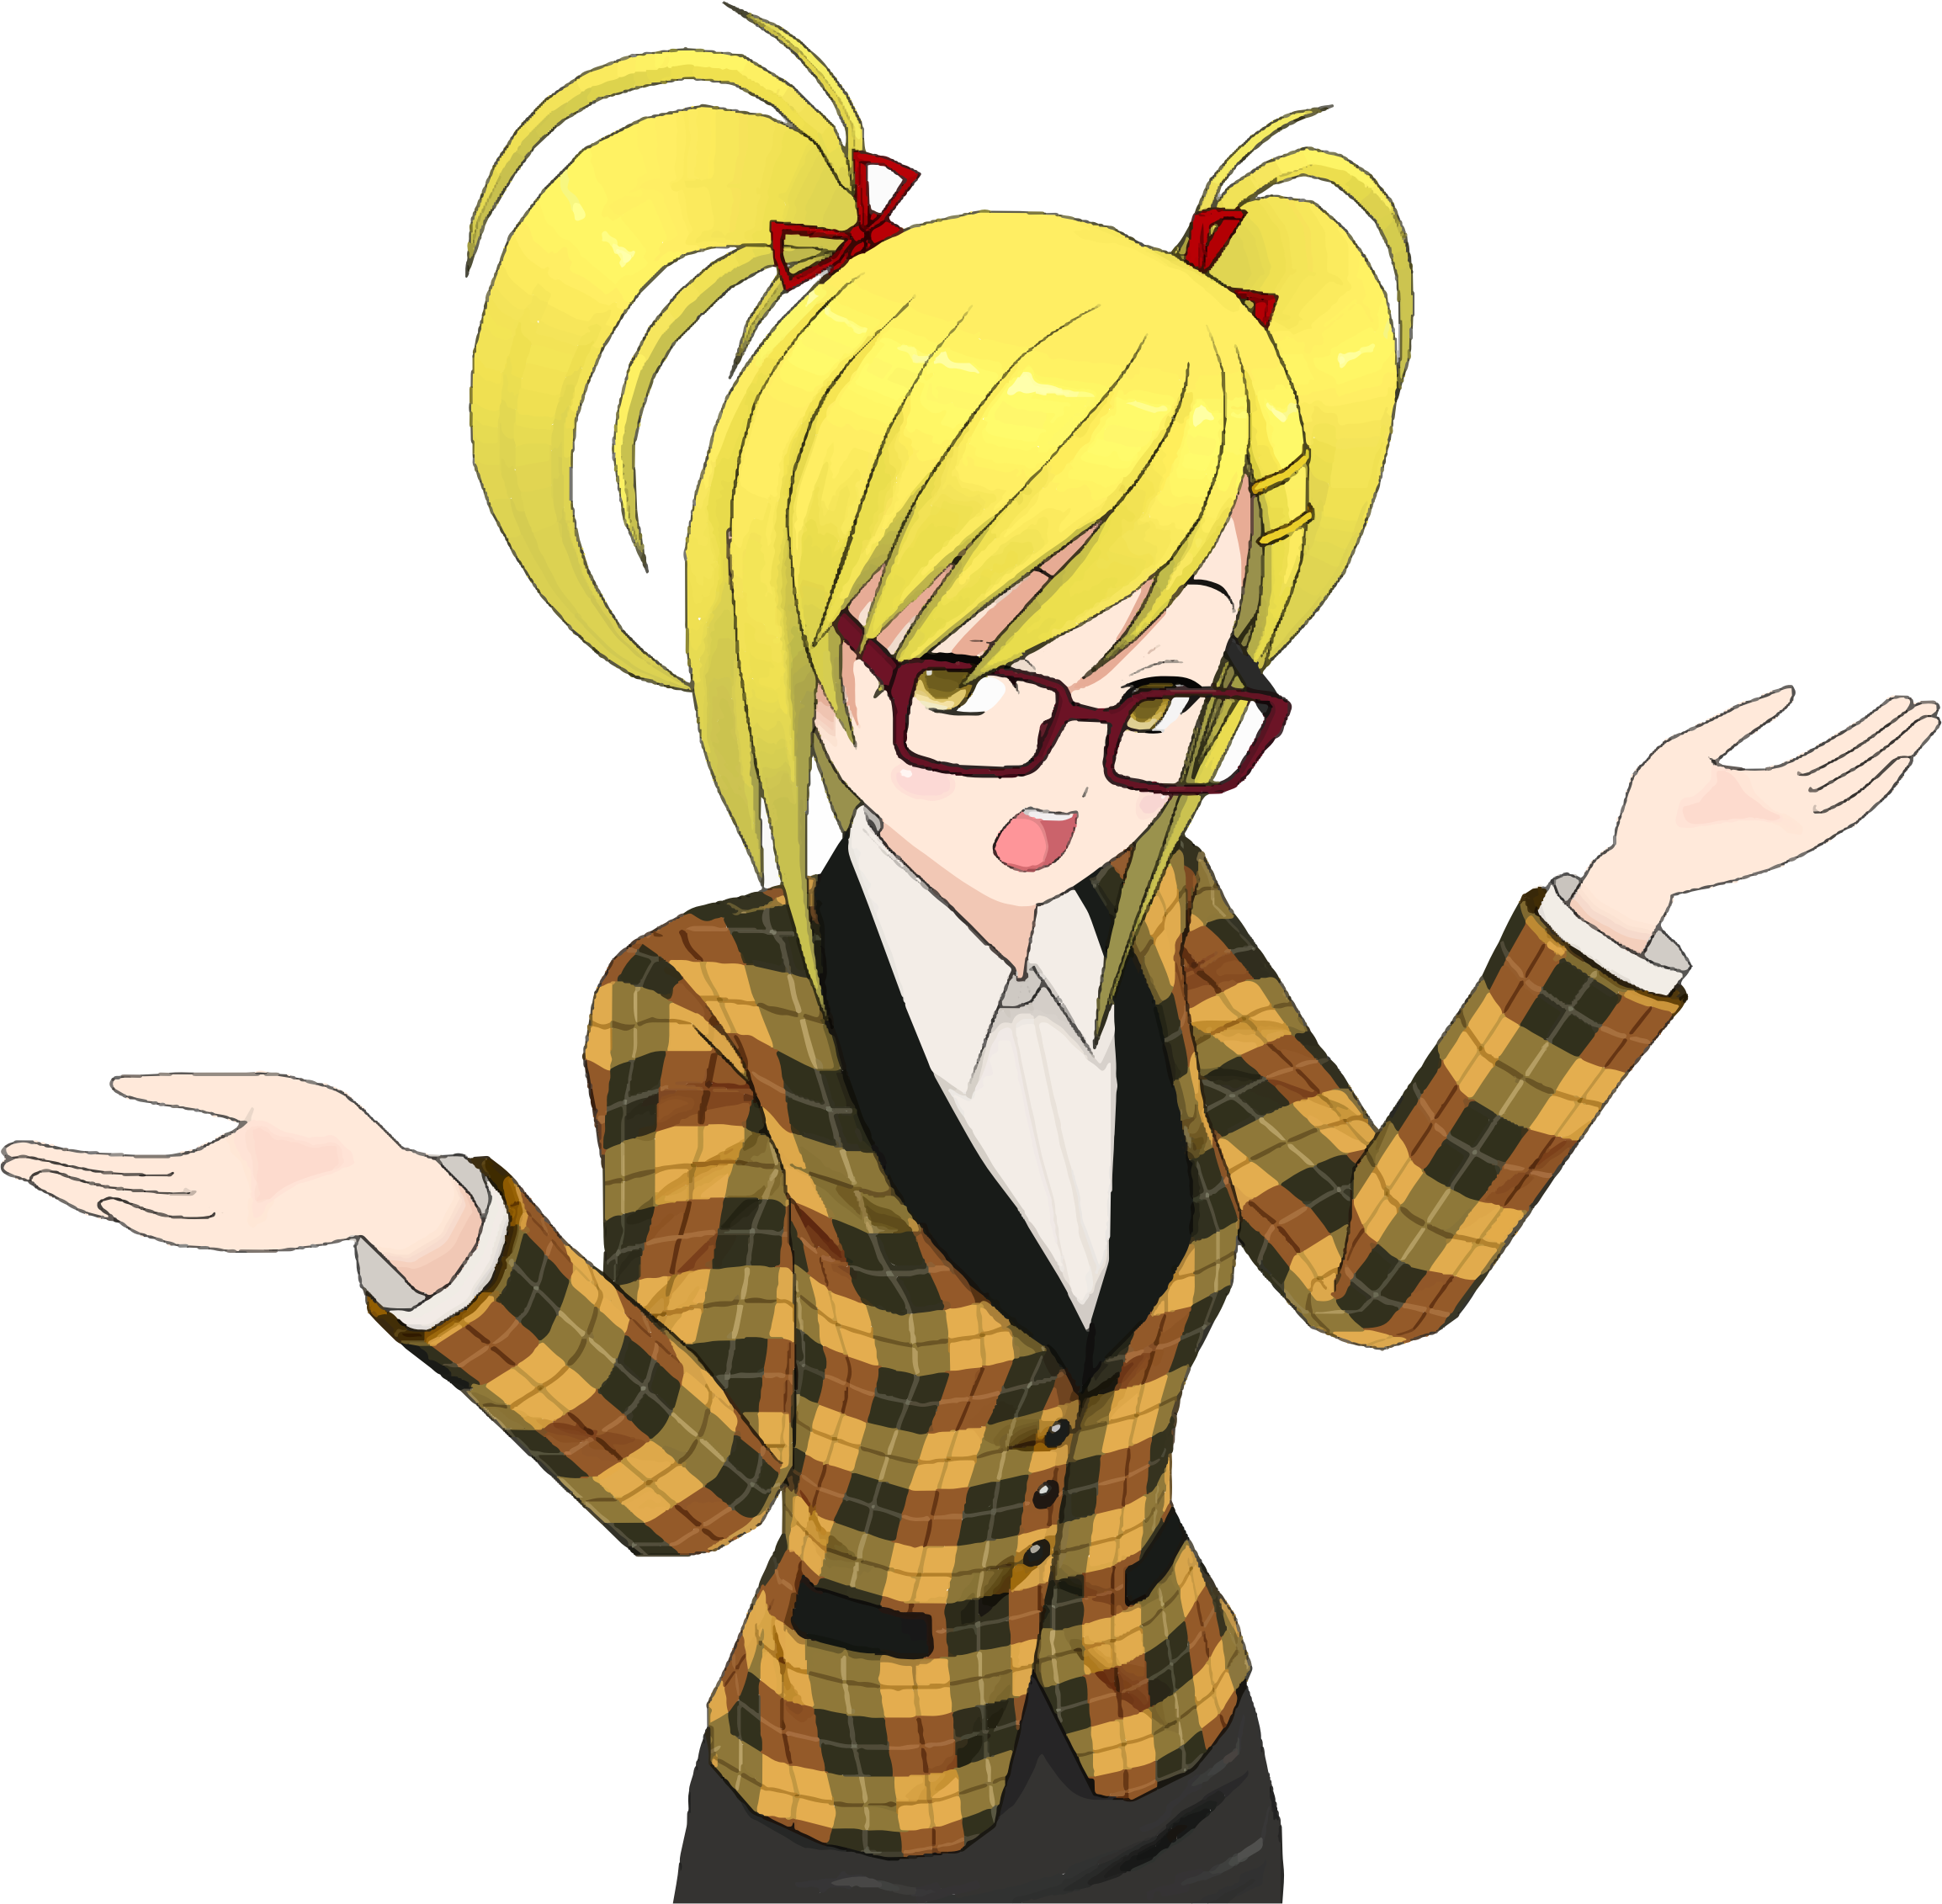 Blonde Anime Girl Vector Clipart image - Free stock photo - Public